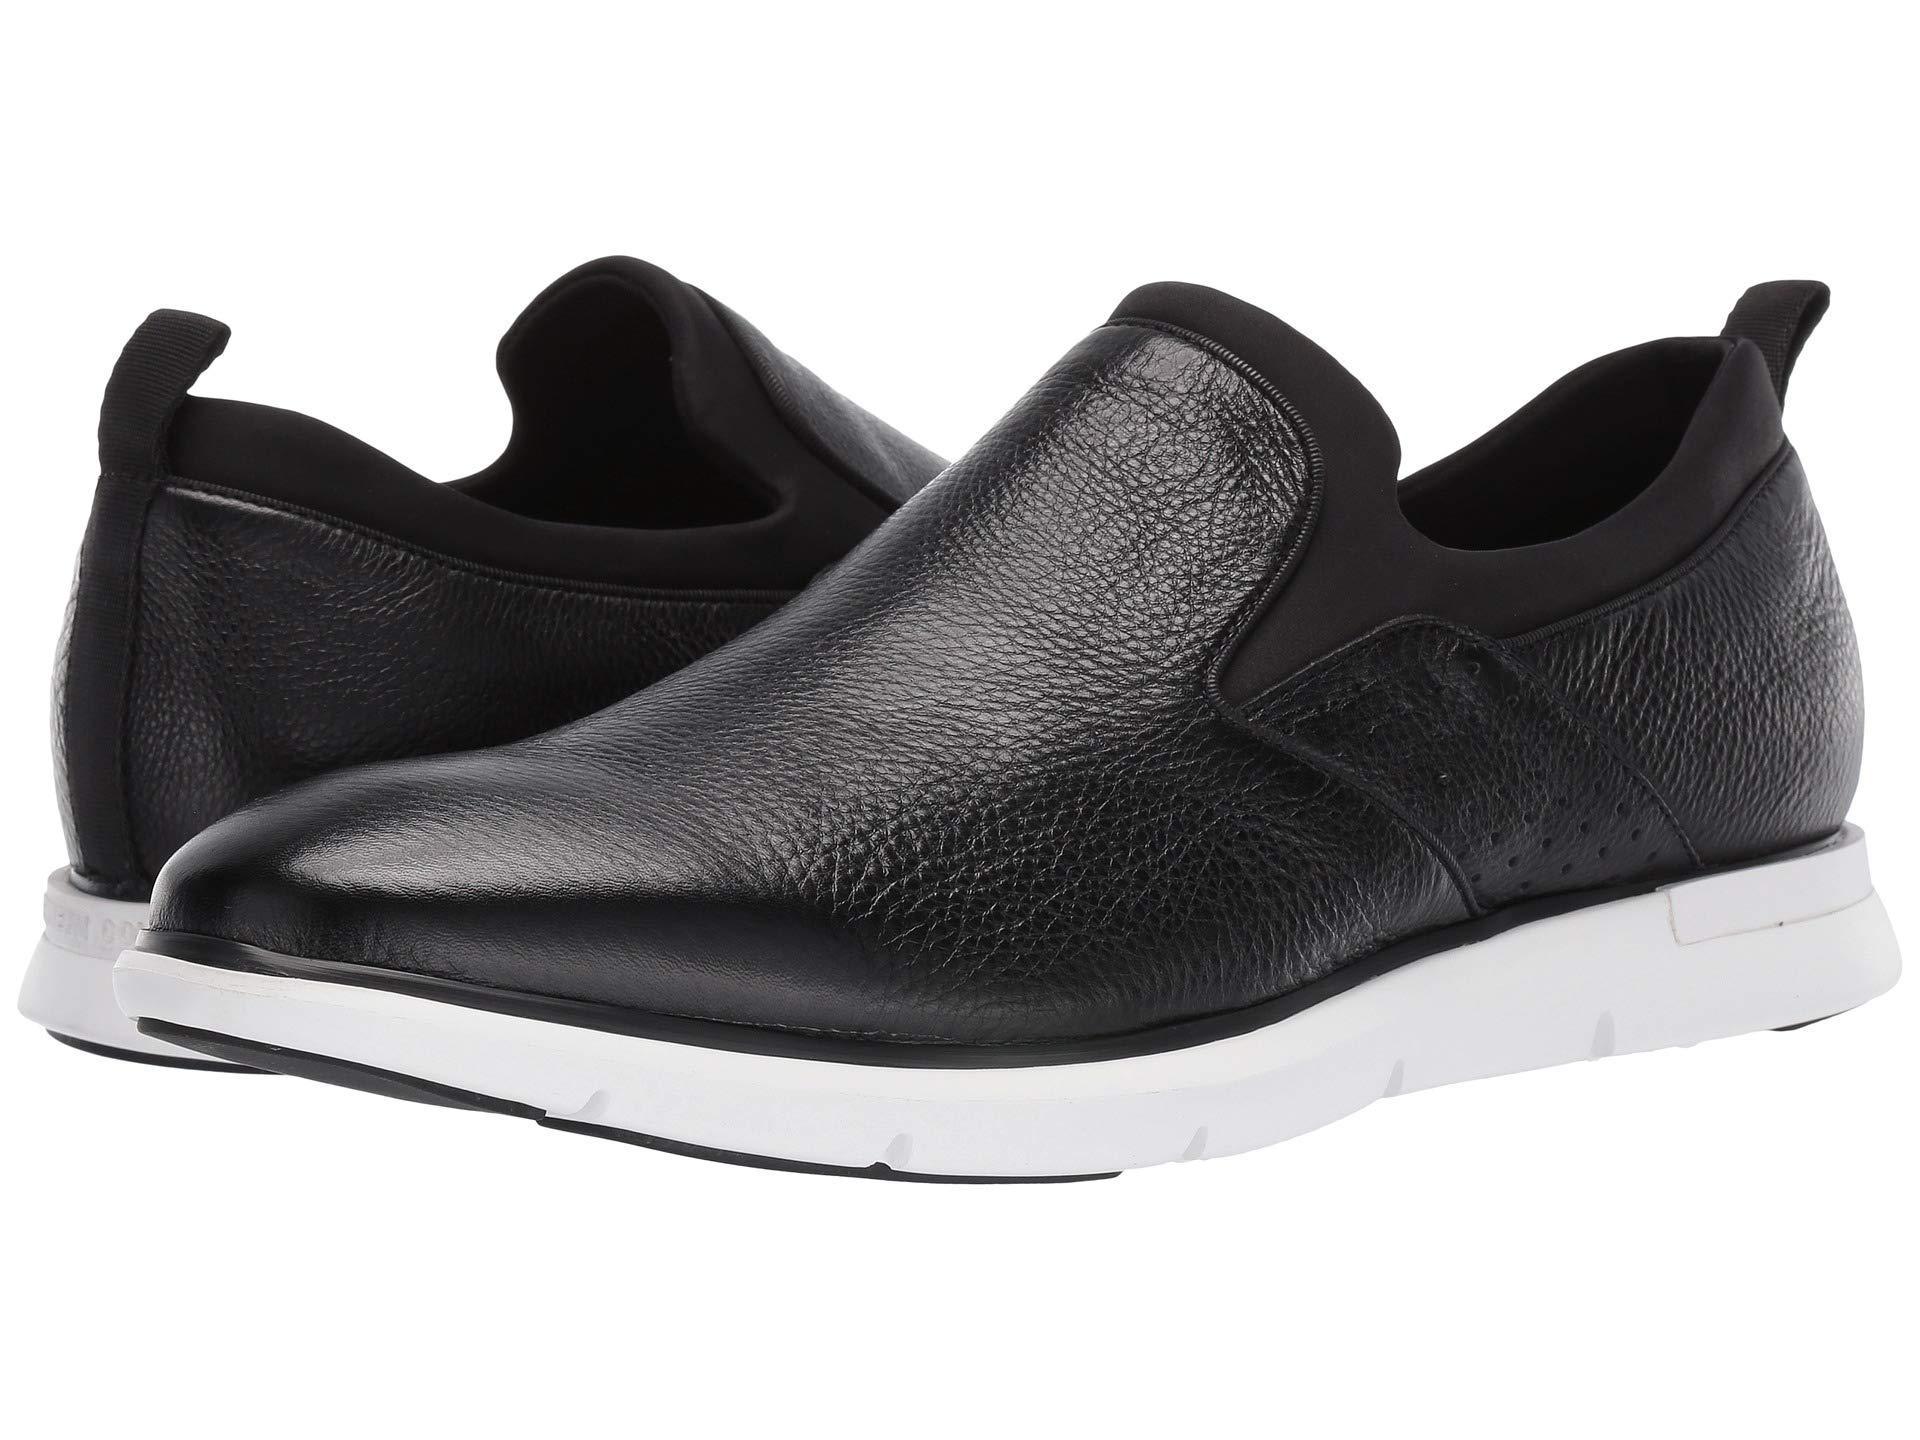 Kenneth Cole Leather Dover Slip-on in Black for Men - Lyst